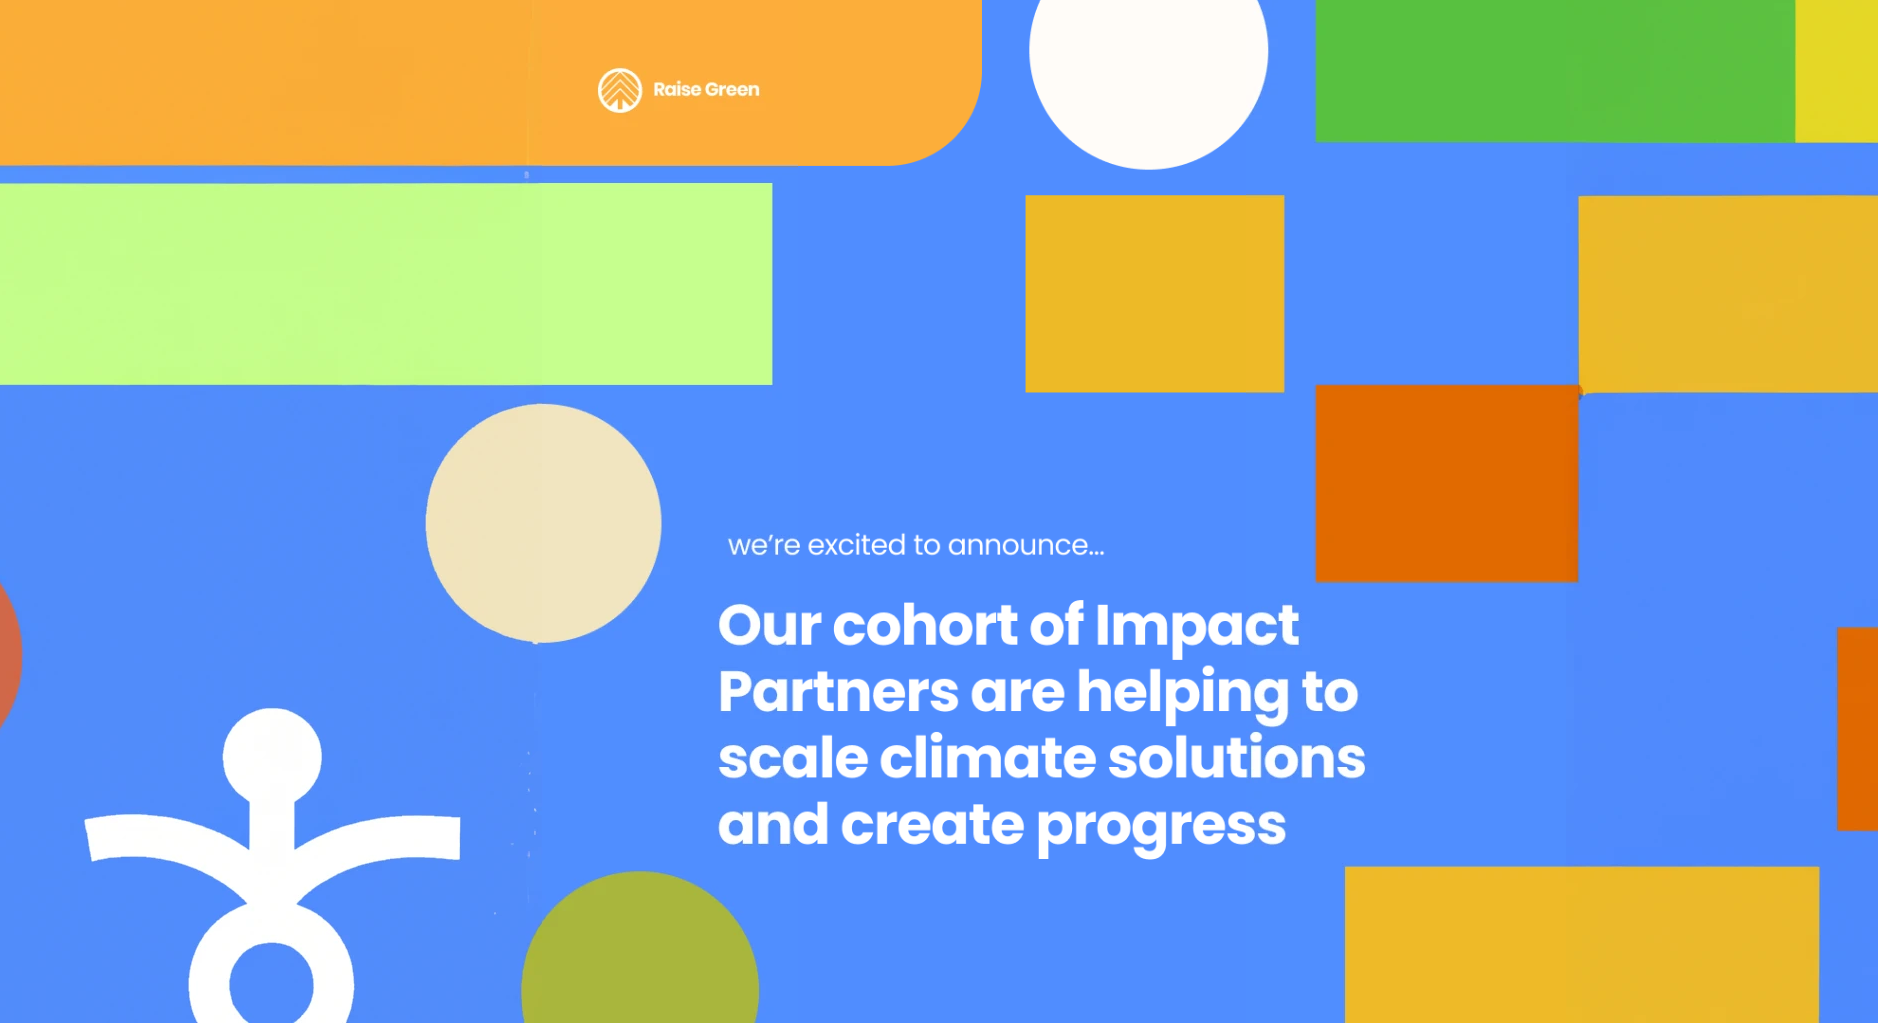 Raise Green Announces Its First Cohort of 20 Impact Partners